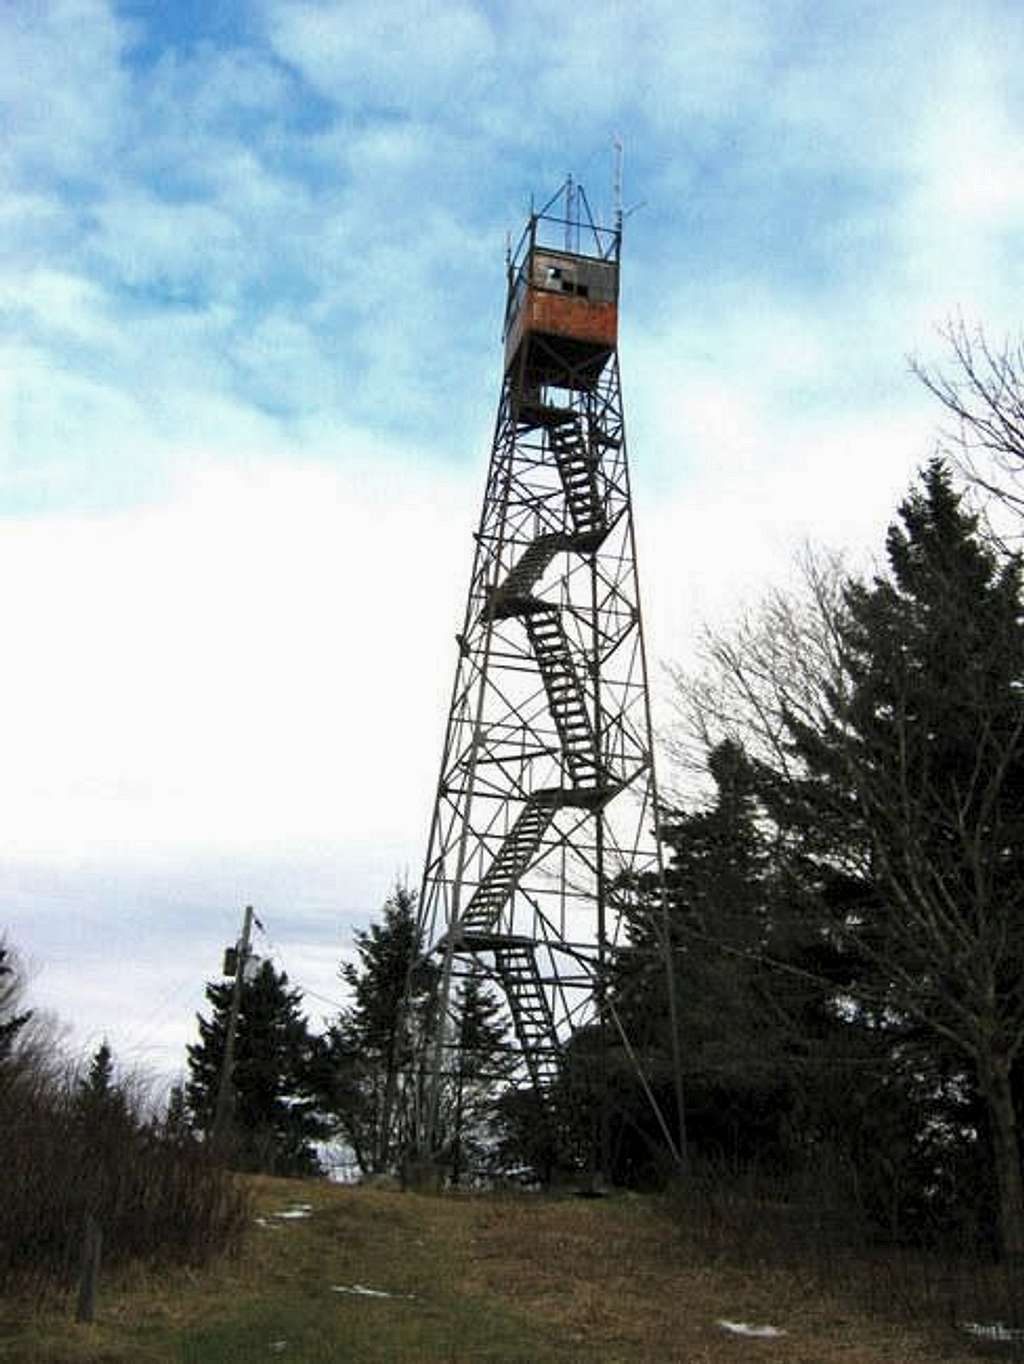 The old fire tower. The...